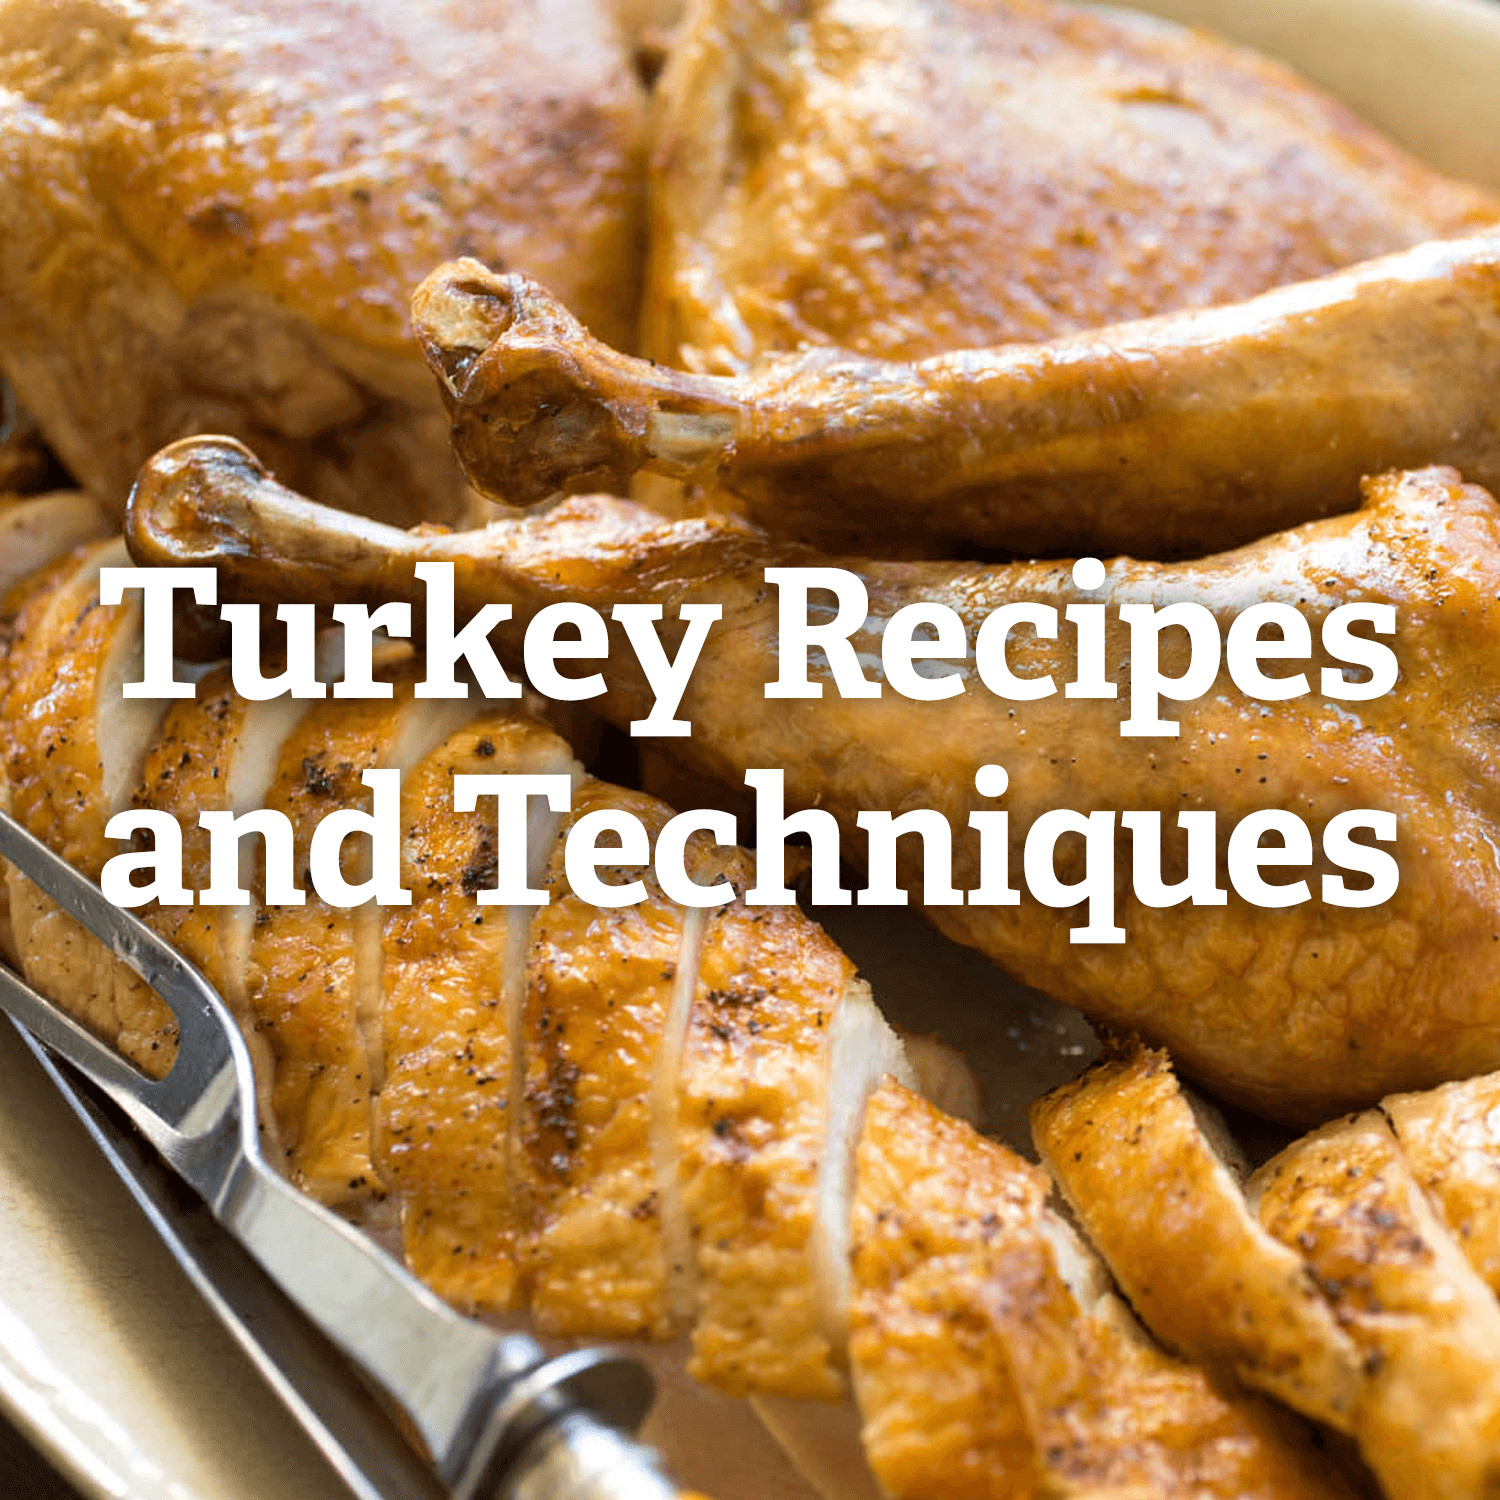 Recipes For Thanksgiving Turkey
 Thanksgiving Turkey Recipes and Techniques